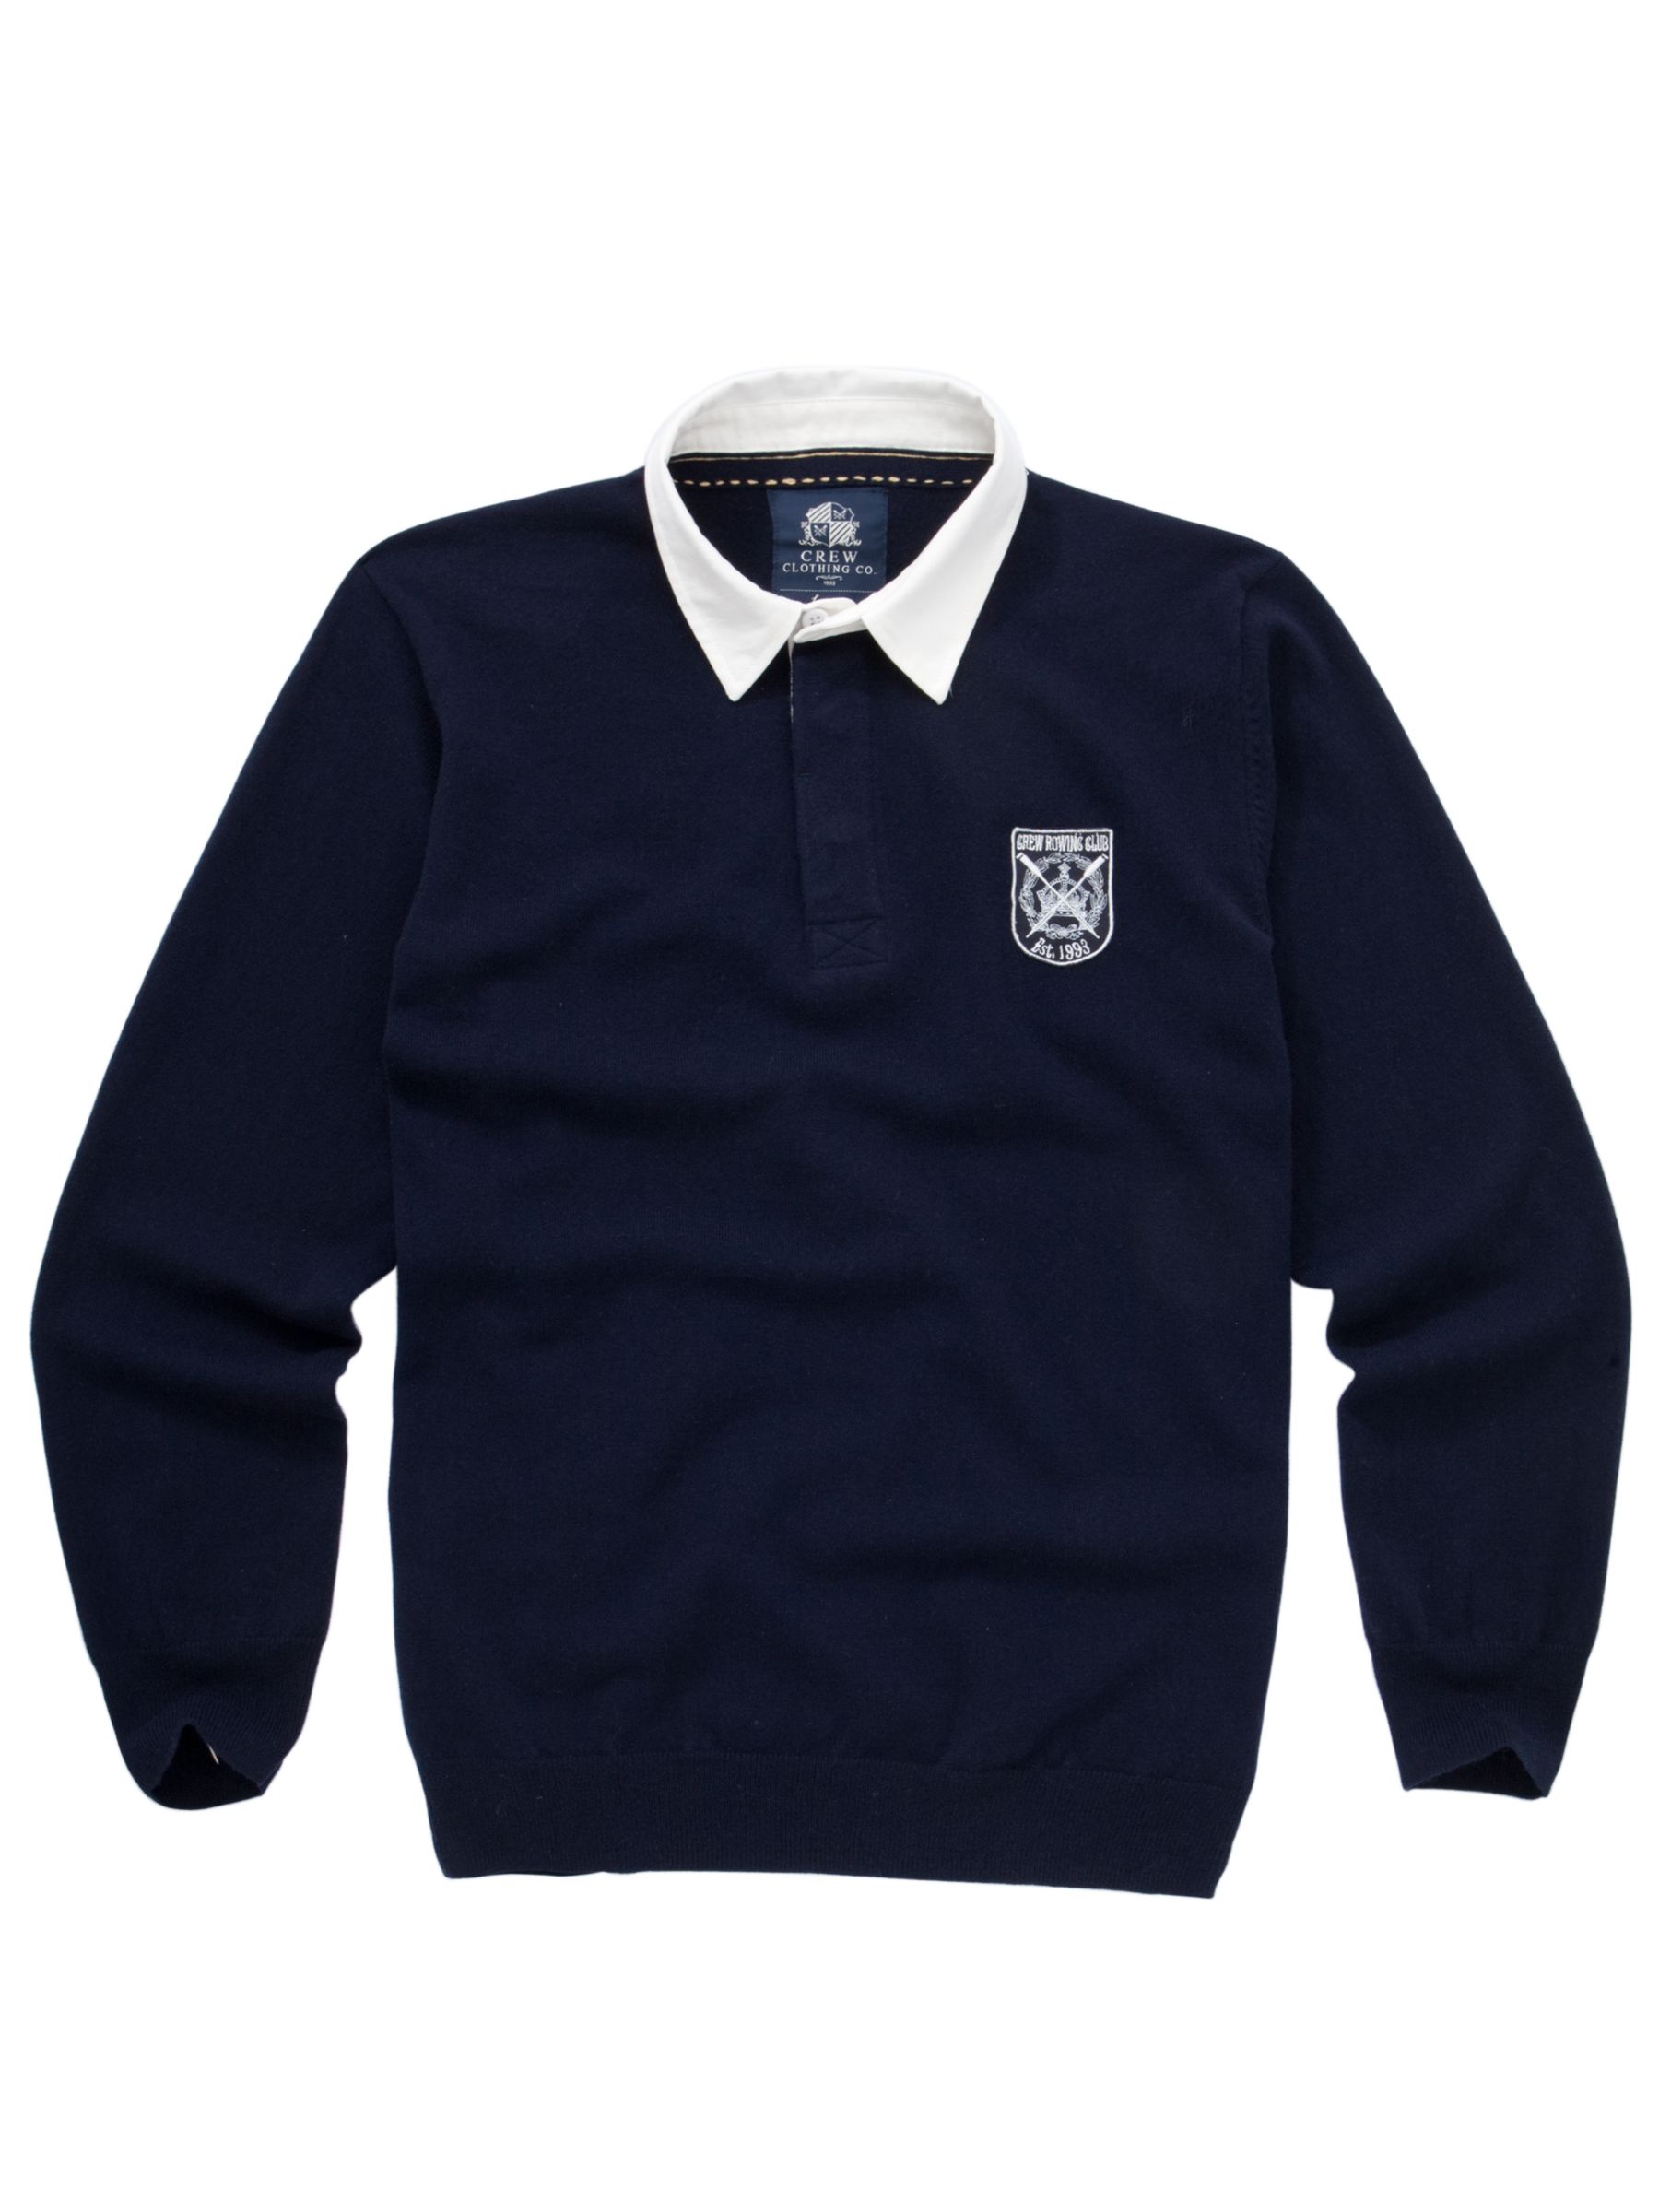 Crew Clothing Knit Rugby Shirt, Navy